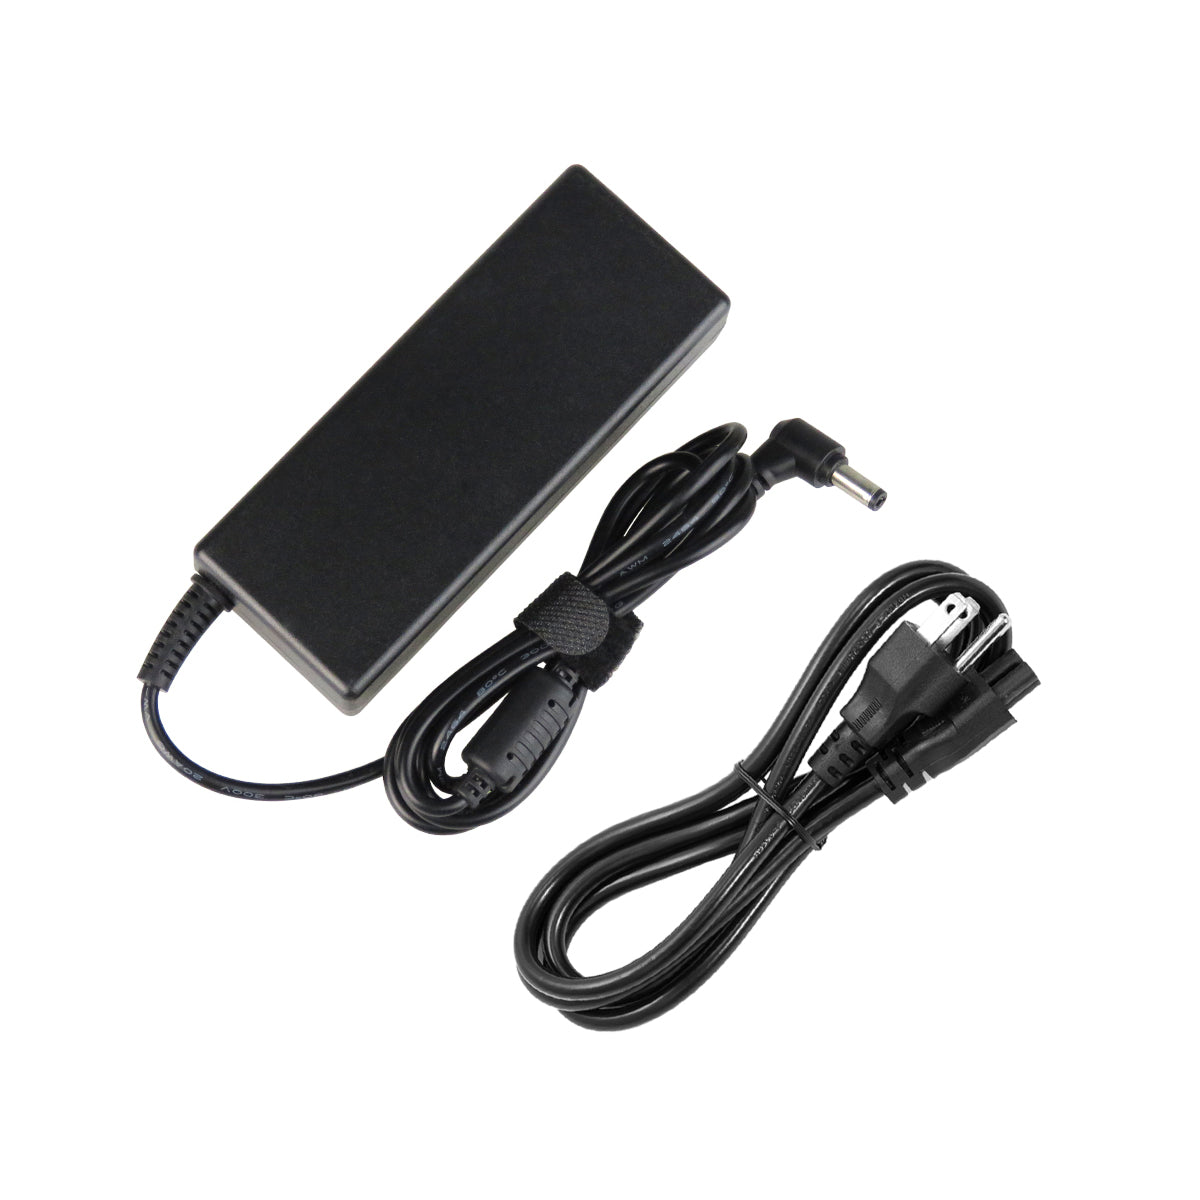 AC Adapter Charger for ASUS X52JT Notebook.